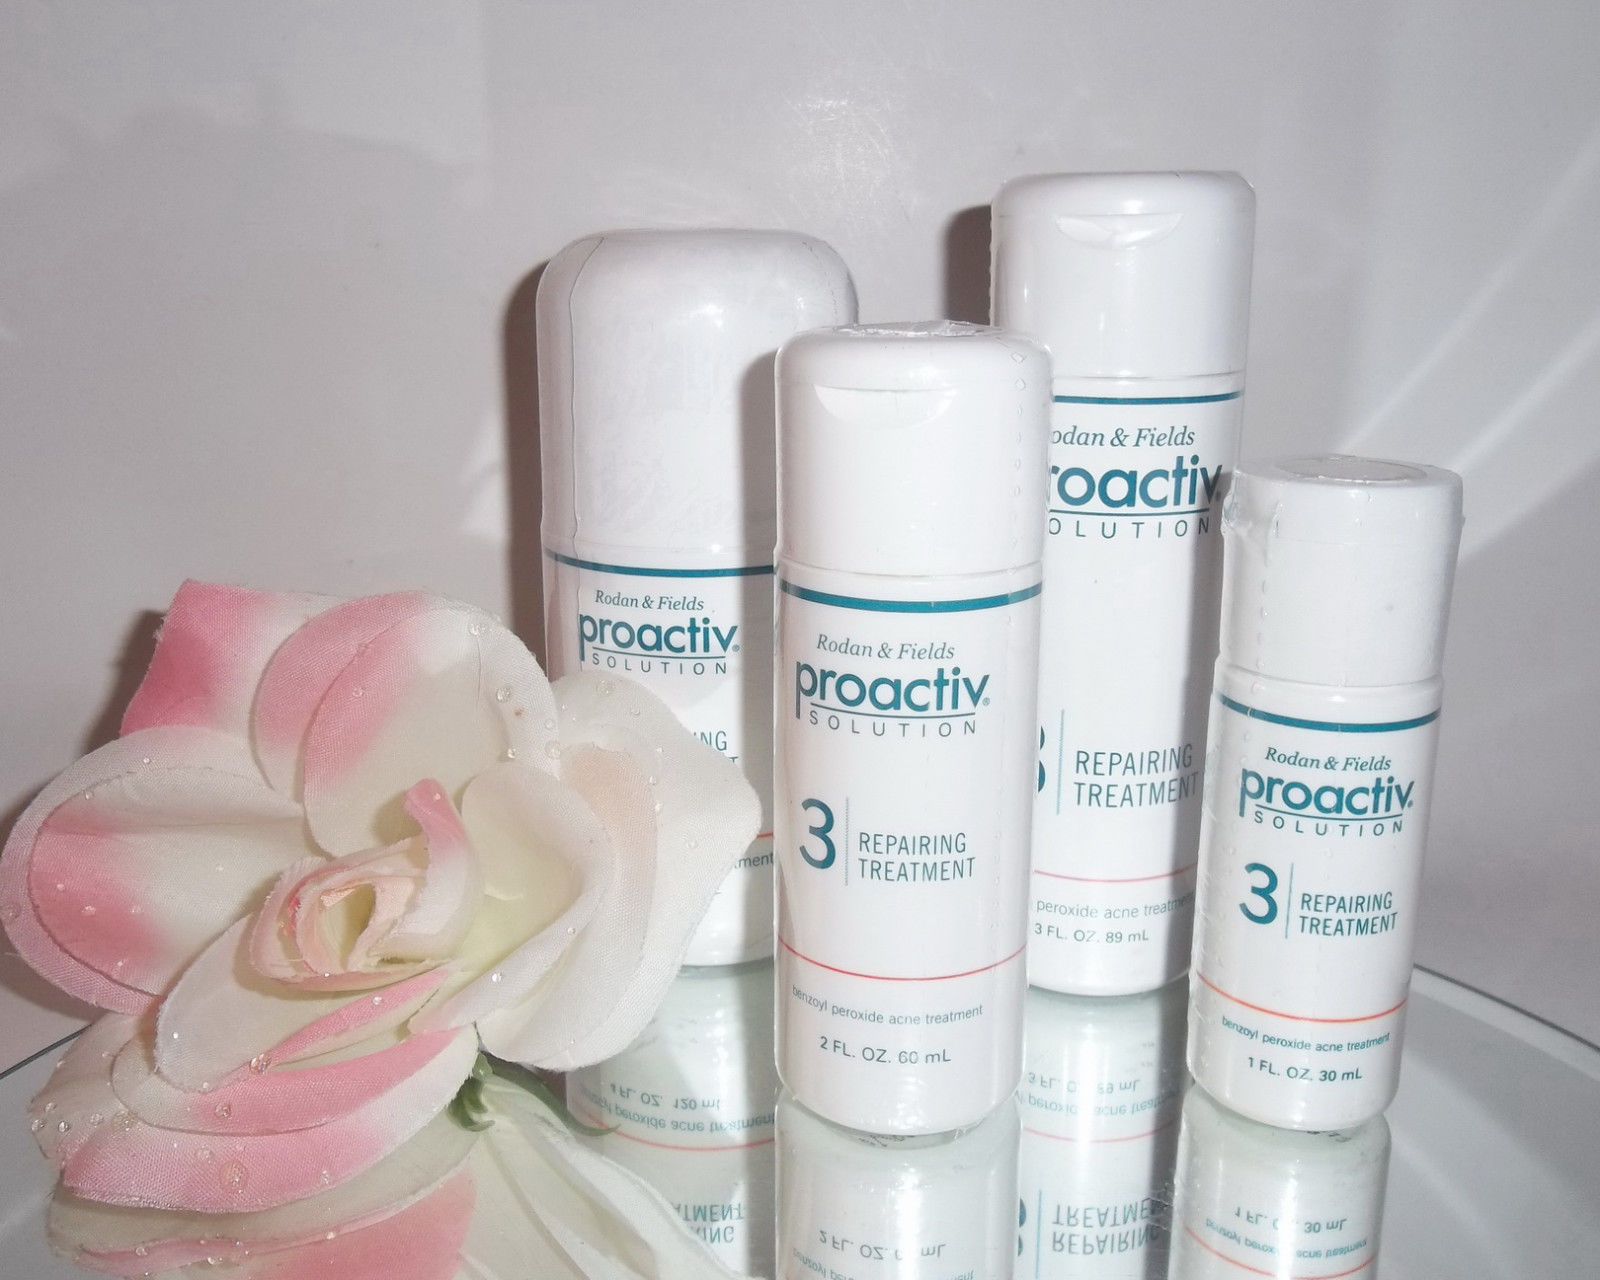 Proactiv Solution Repairing Treatment Acne Lotion YOUR CHOICE OF SIZE Proactive - $24.99 - $34.99